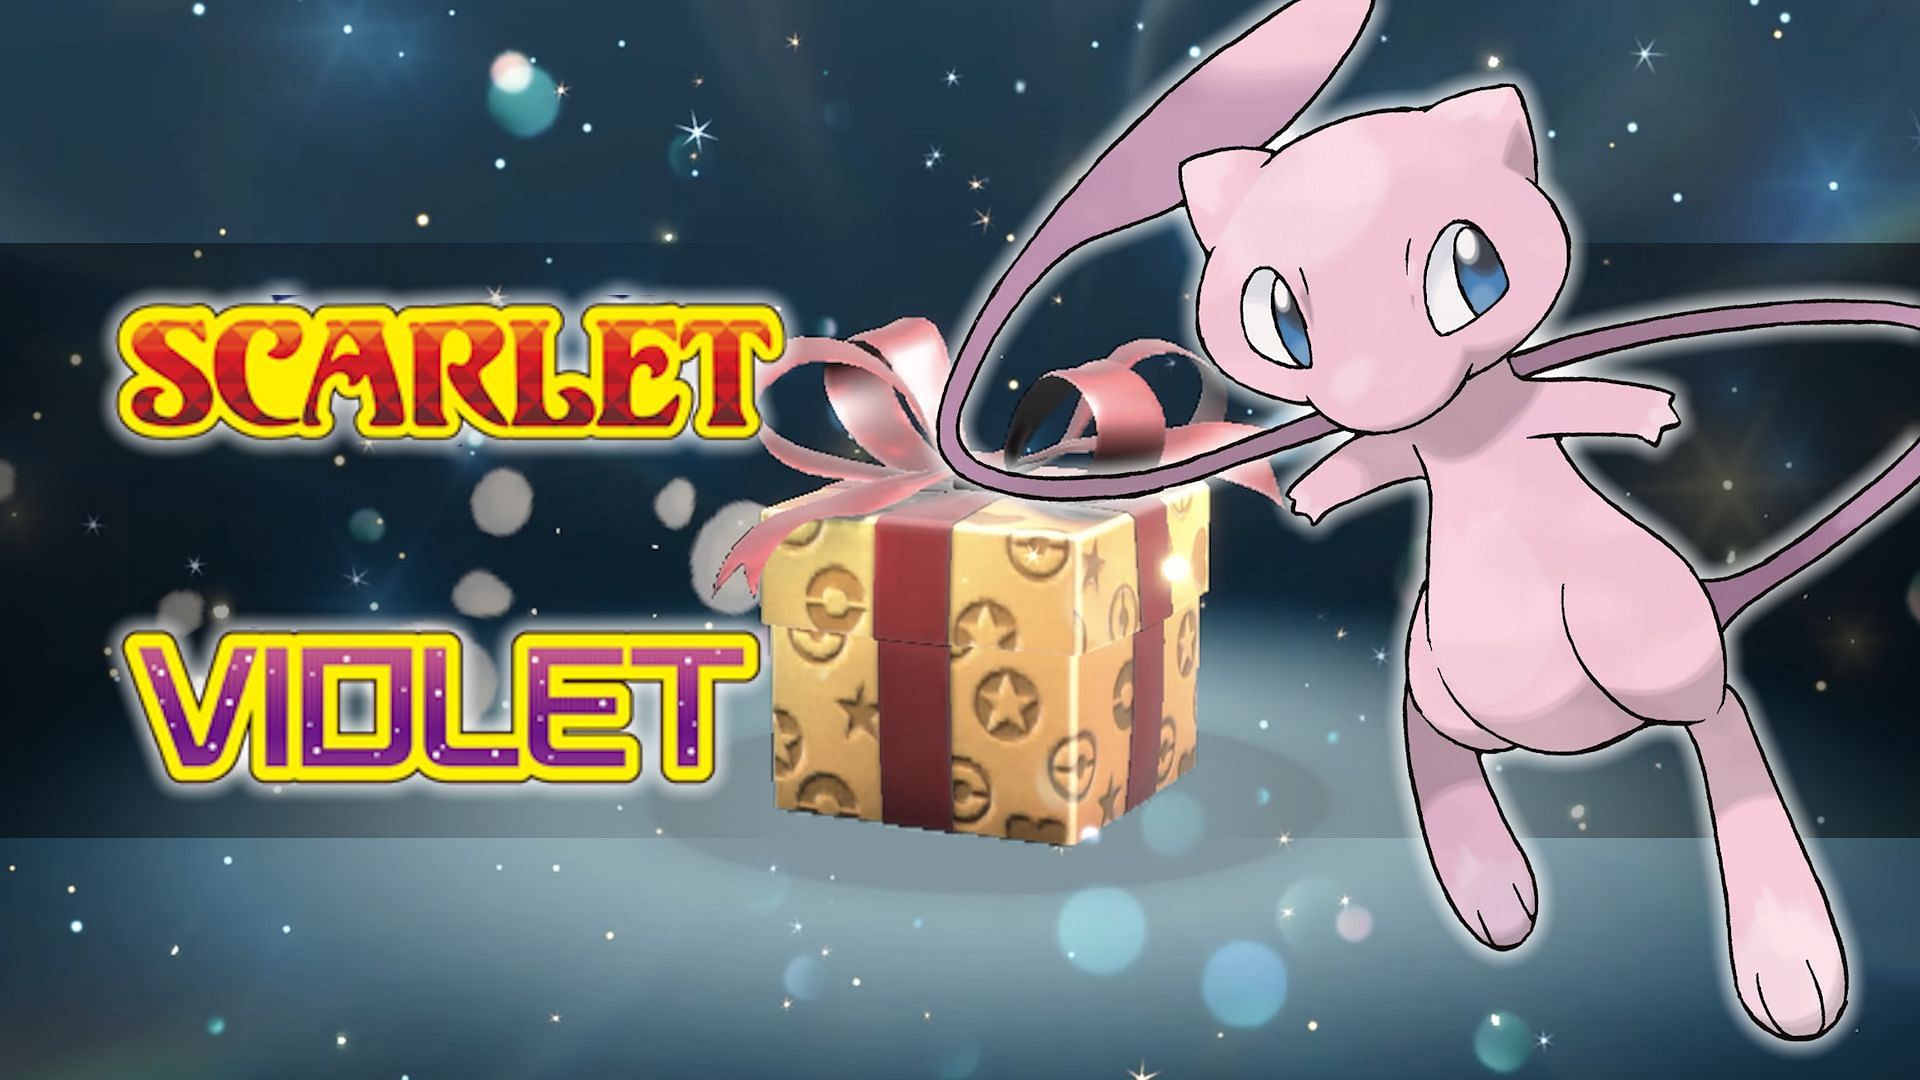 Pokemon Scarlet & Violet Mystery Gift Codes & How to Redeem